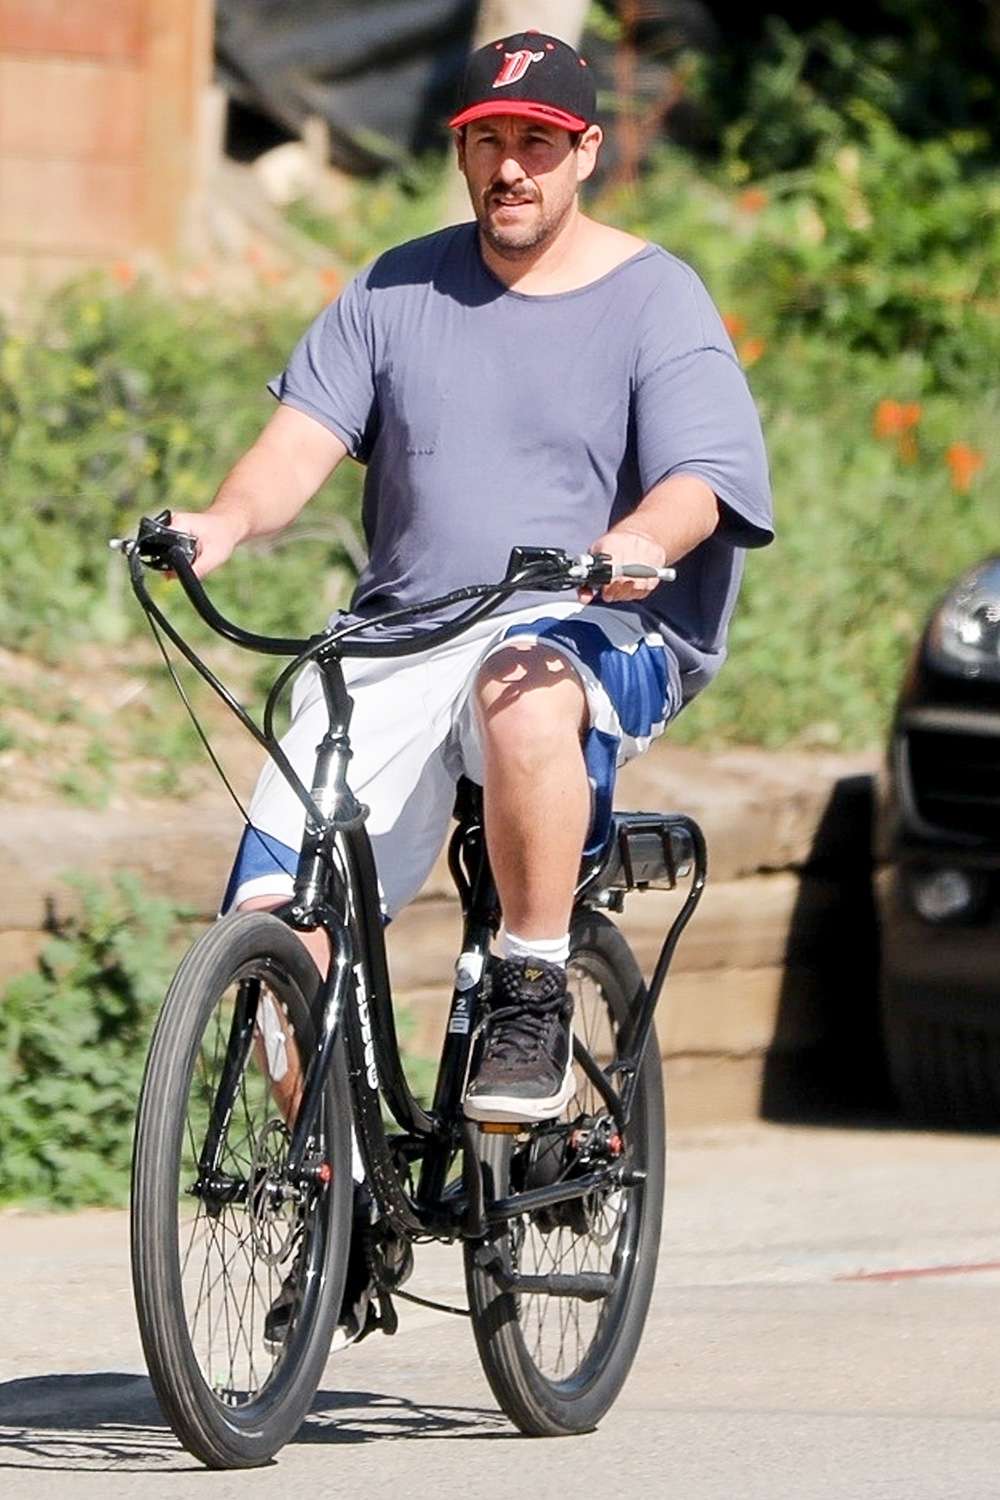 Adam Sandler and his wife Jackie share a laugh as they race each other on cruisers while out for a bike ride